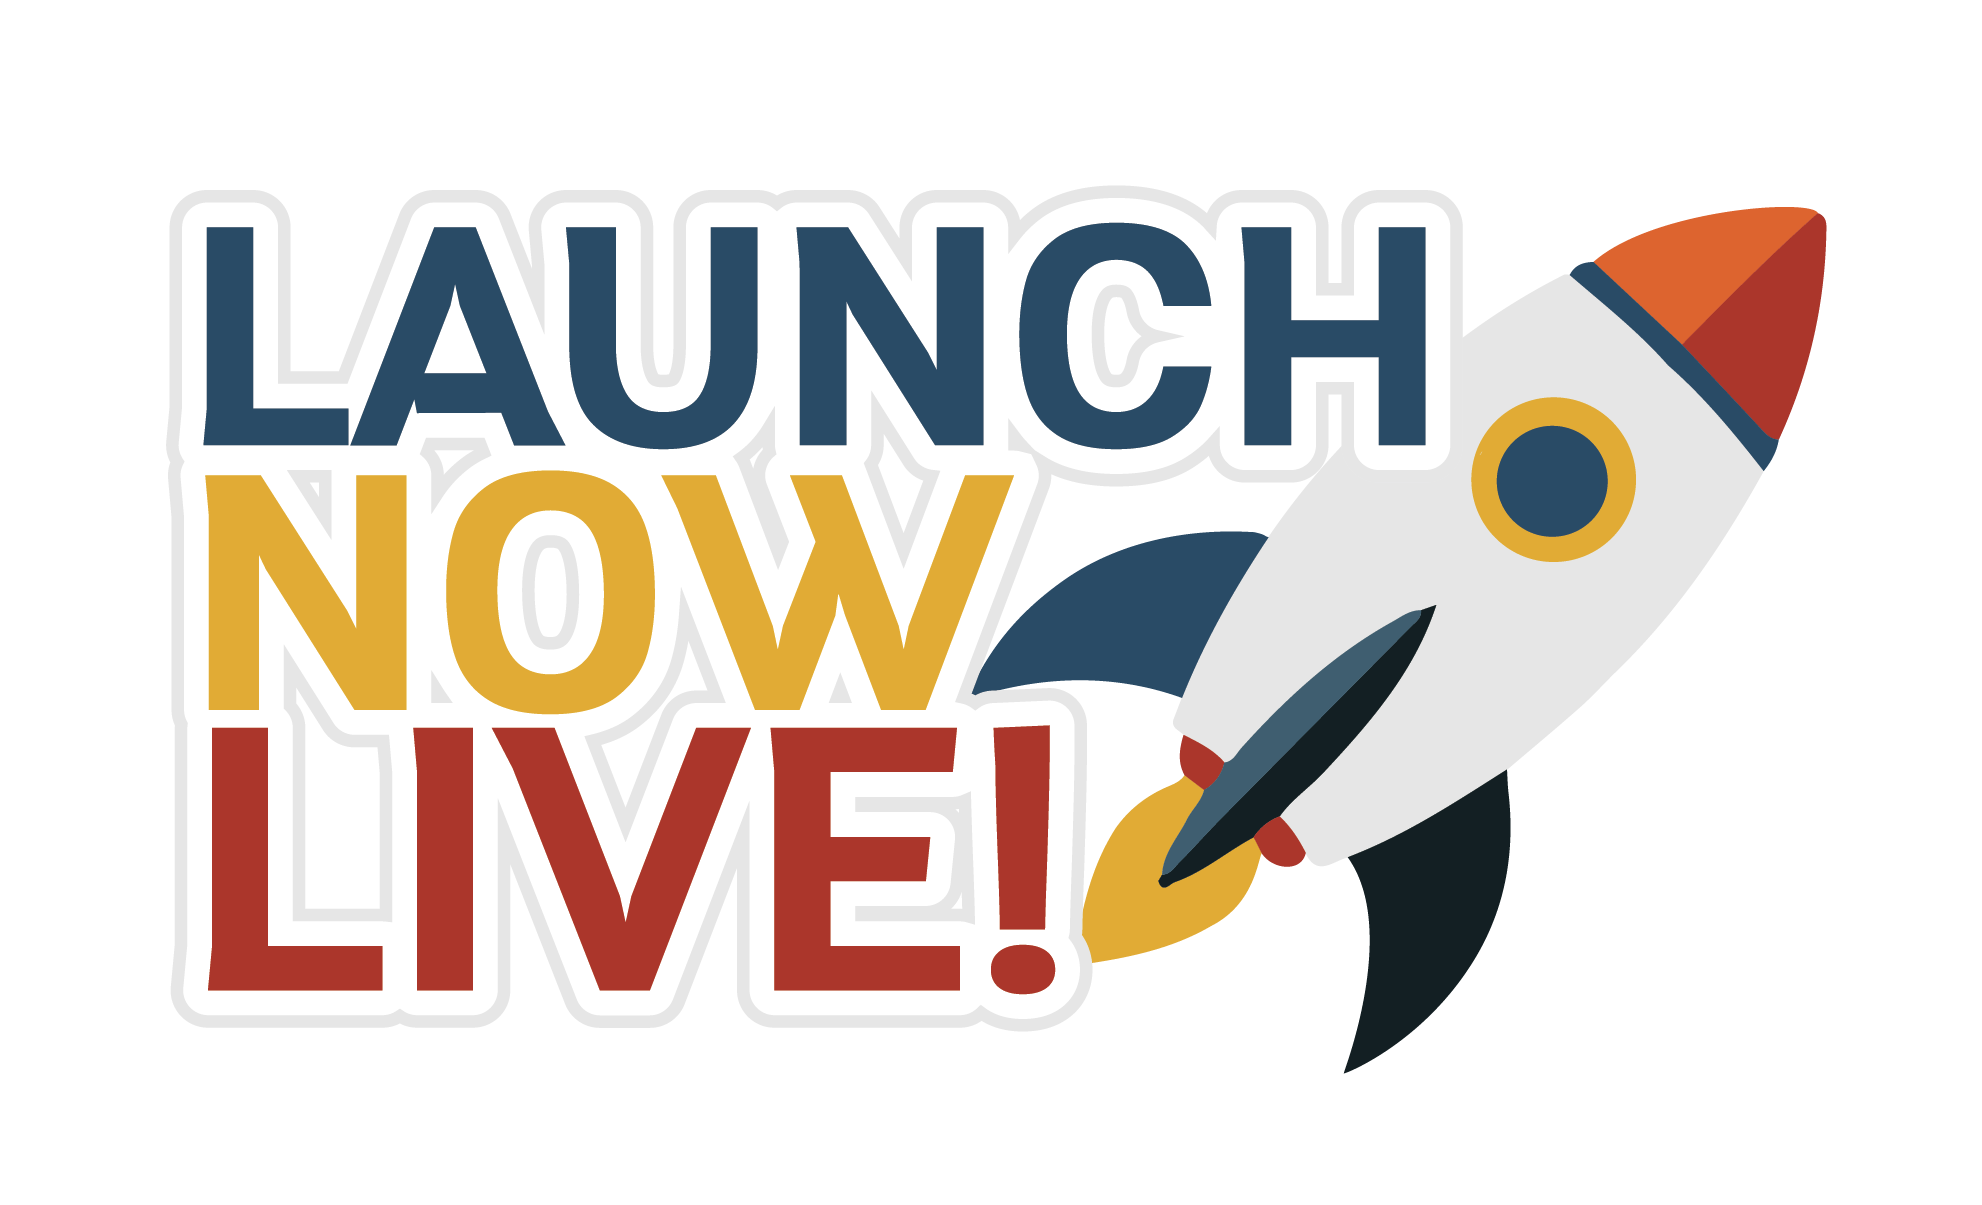 Launch Now Live!